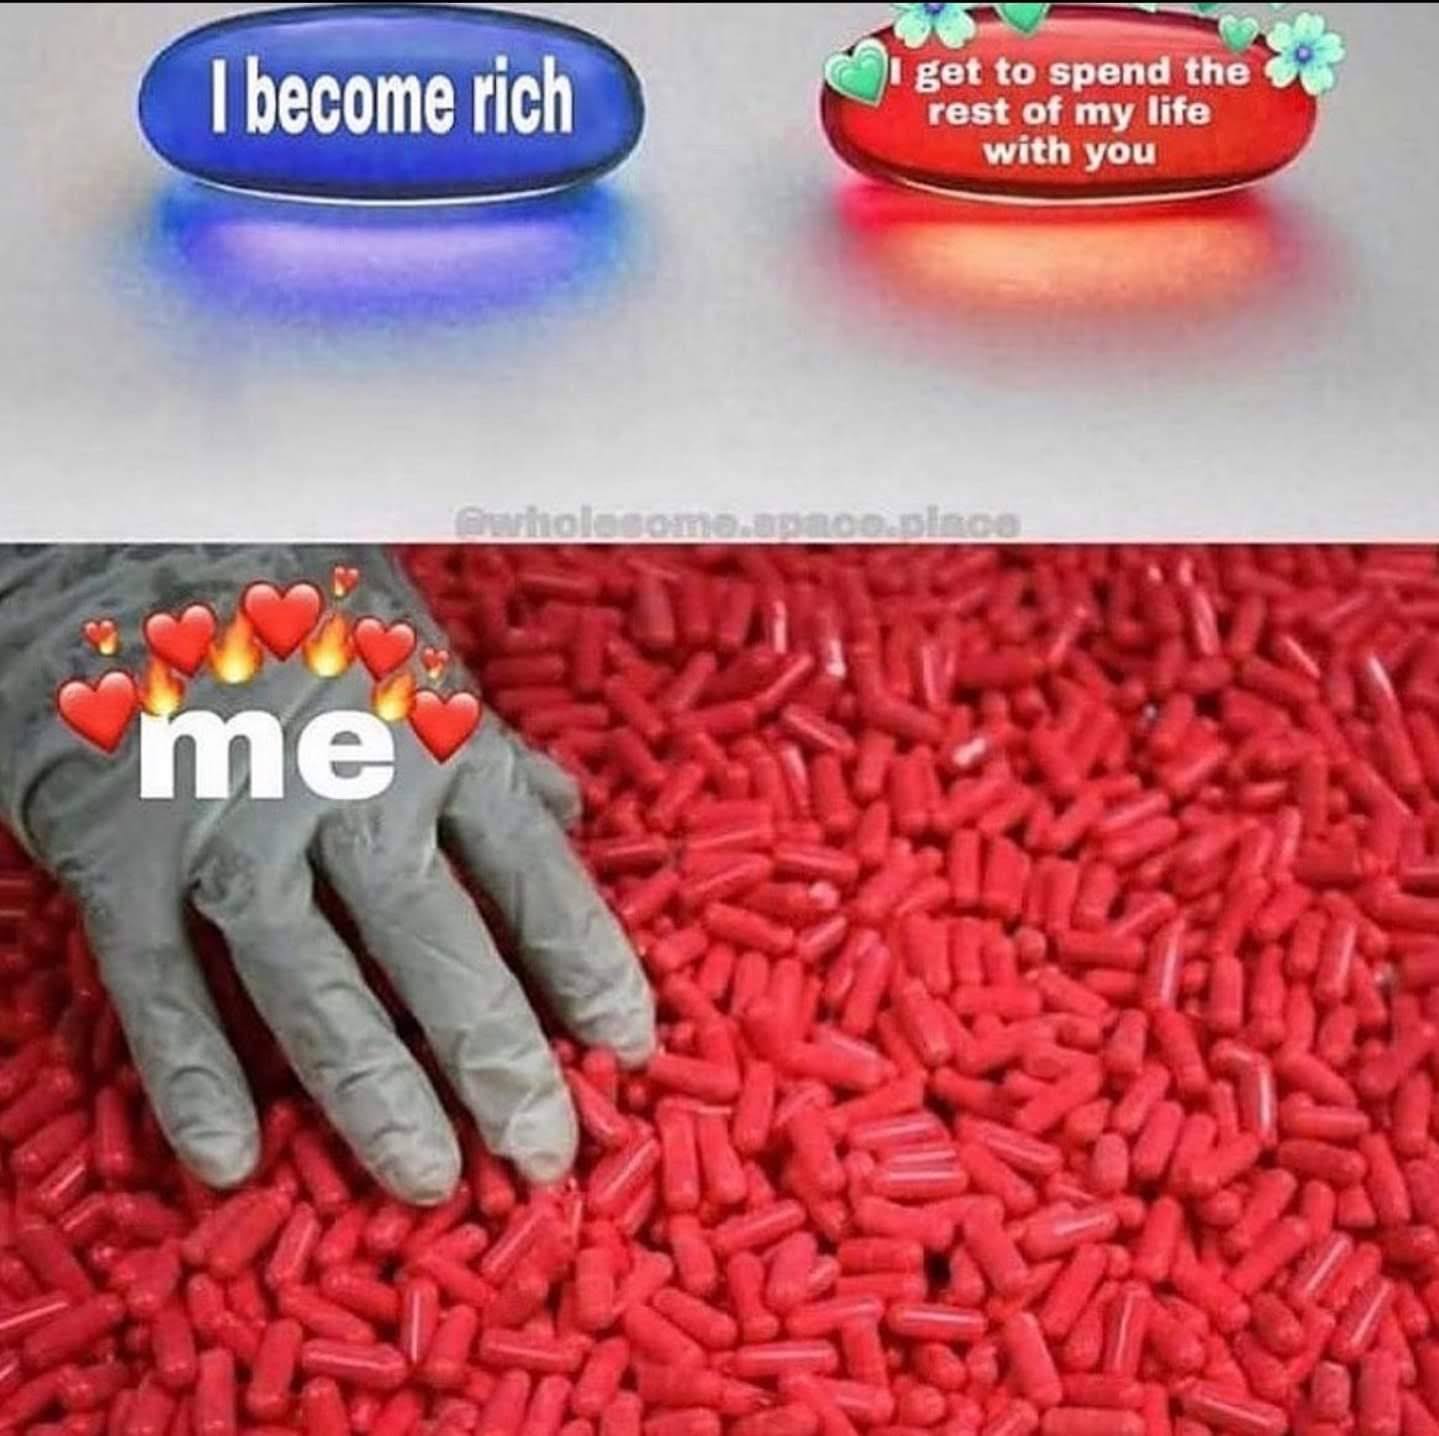 A red pill, blue pill meme where the choices are getting rich and spending the rest of my life with you. The latter choice wins